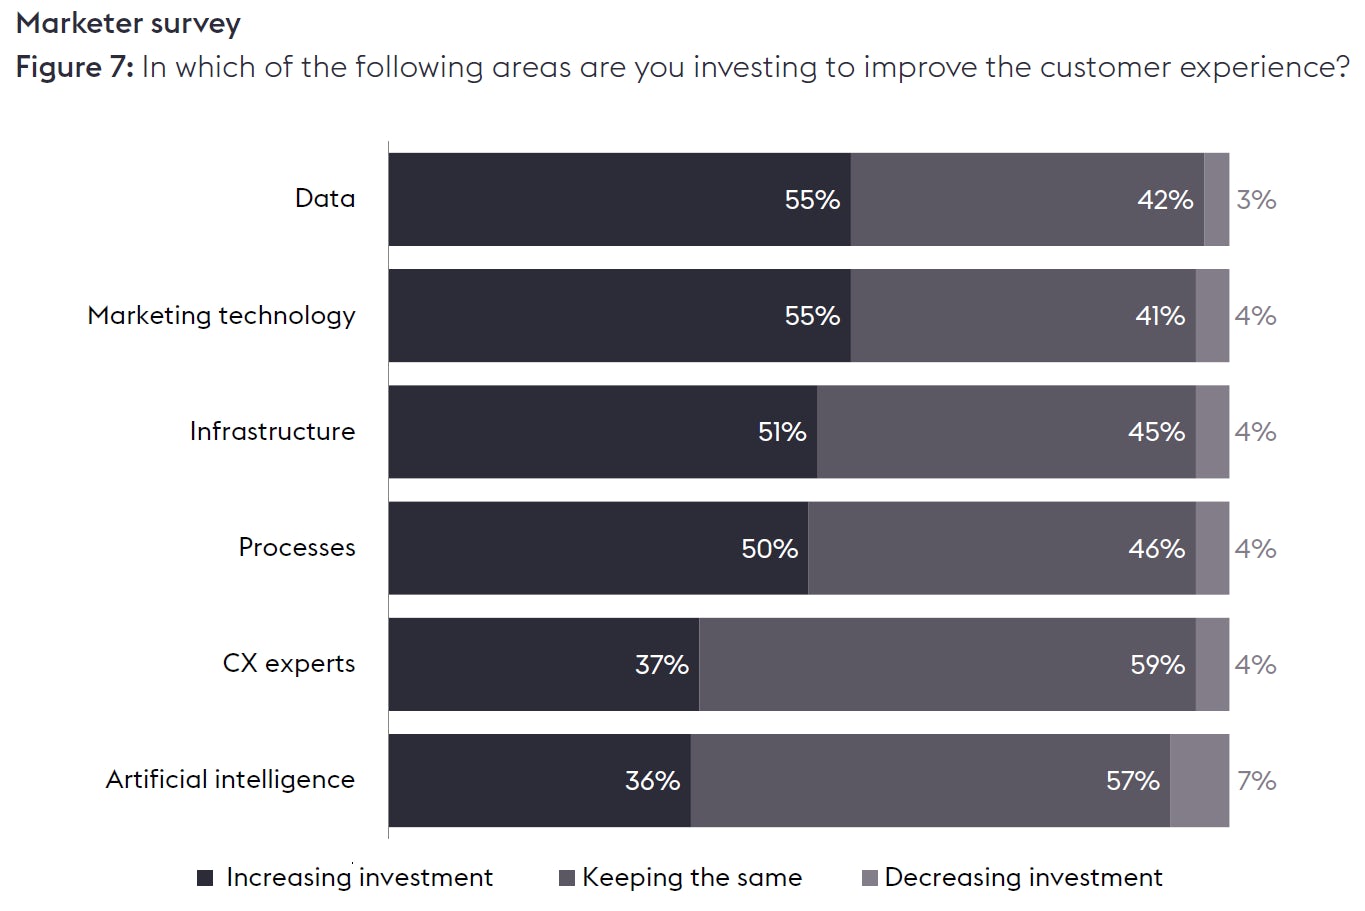 Graph which indicates whether marketers are increasing, maintaining or decreasing their investment in six areas related to CX: data, marketing technology, infrastructure, processes, CX experts and artificial intelligence.